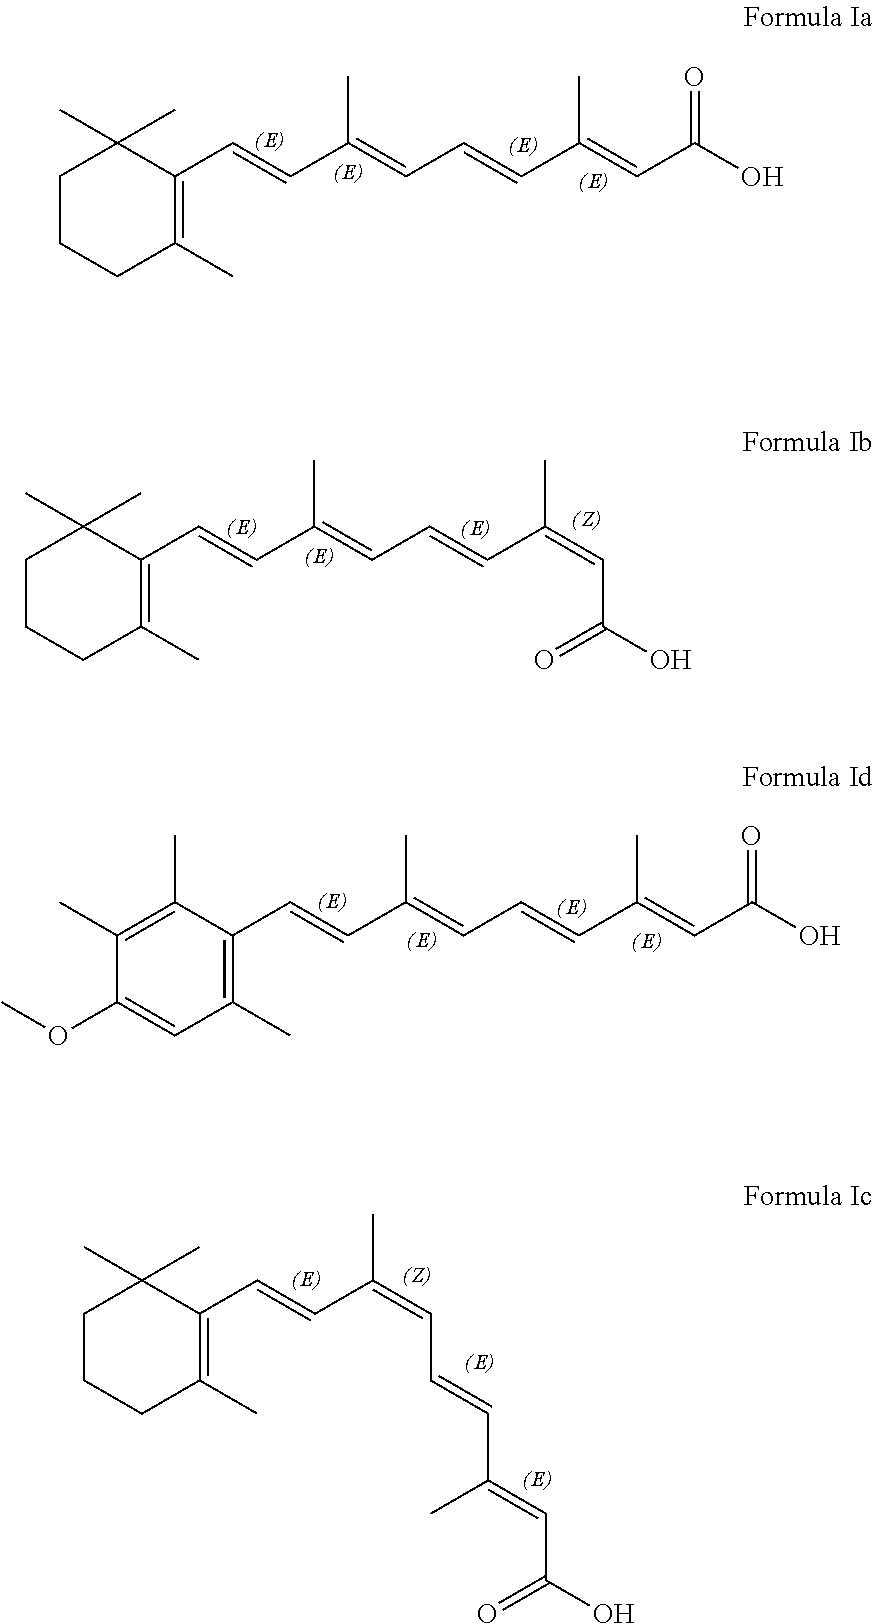 Stereospecific synthesis process for tretinoin compounds